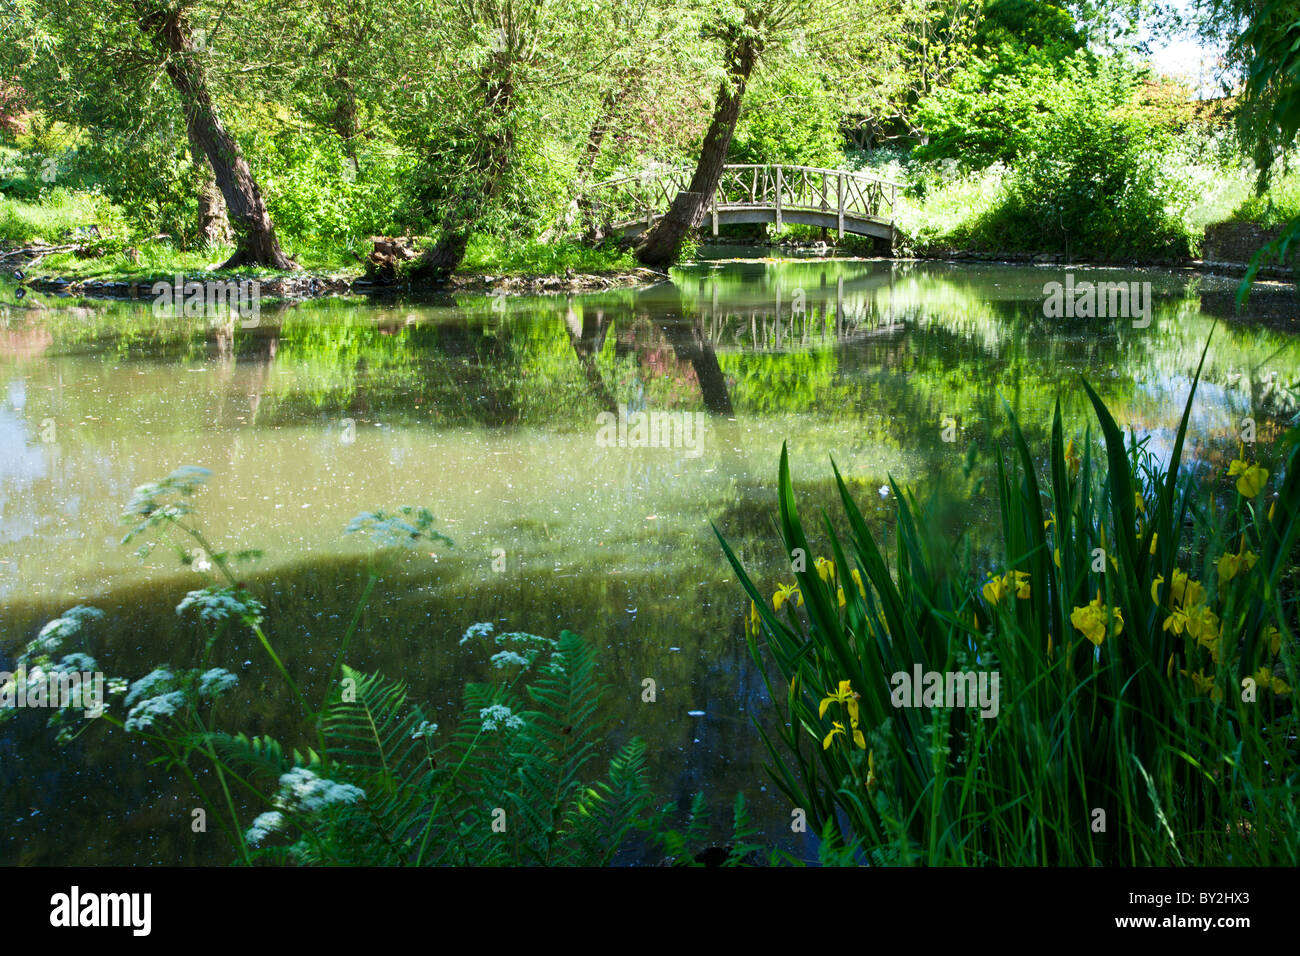 A large ornamental pond or small lake with a rustic wooden bridge in an English country garden in summer Stock Photo